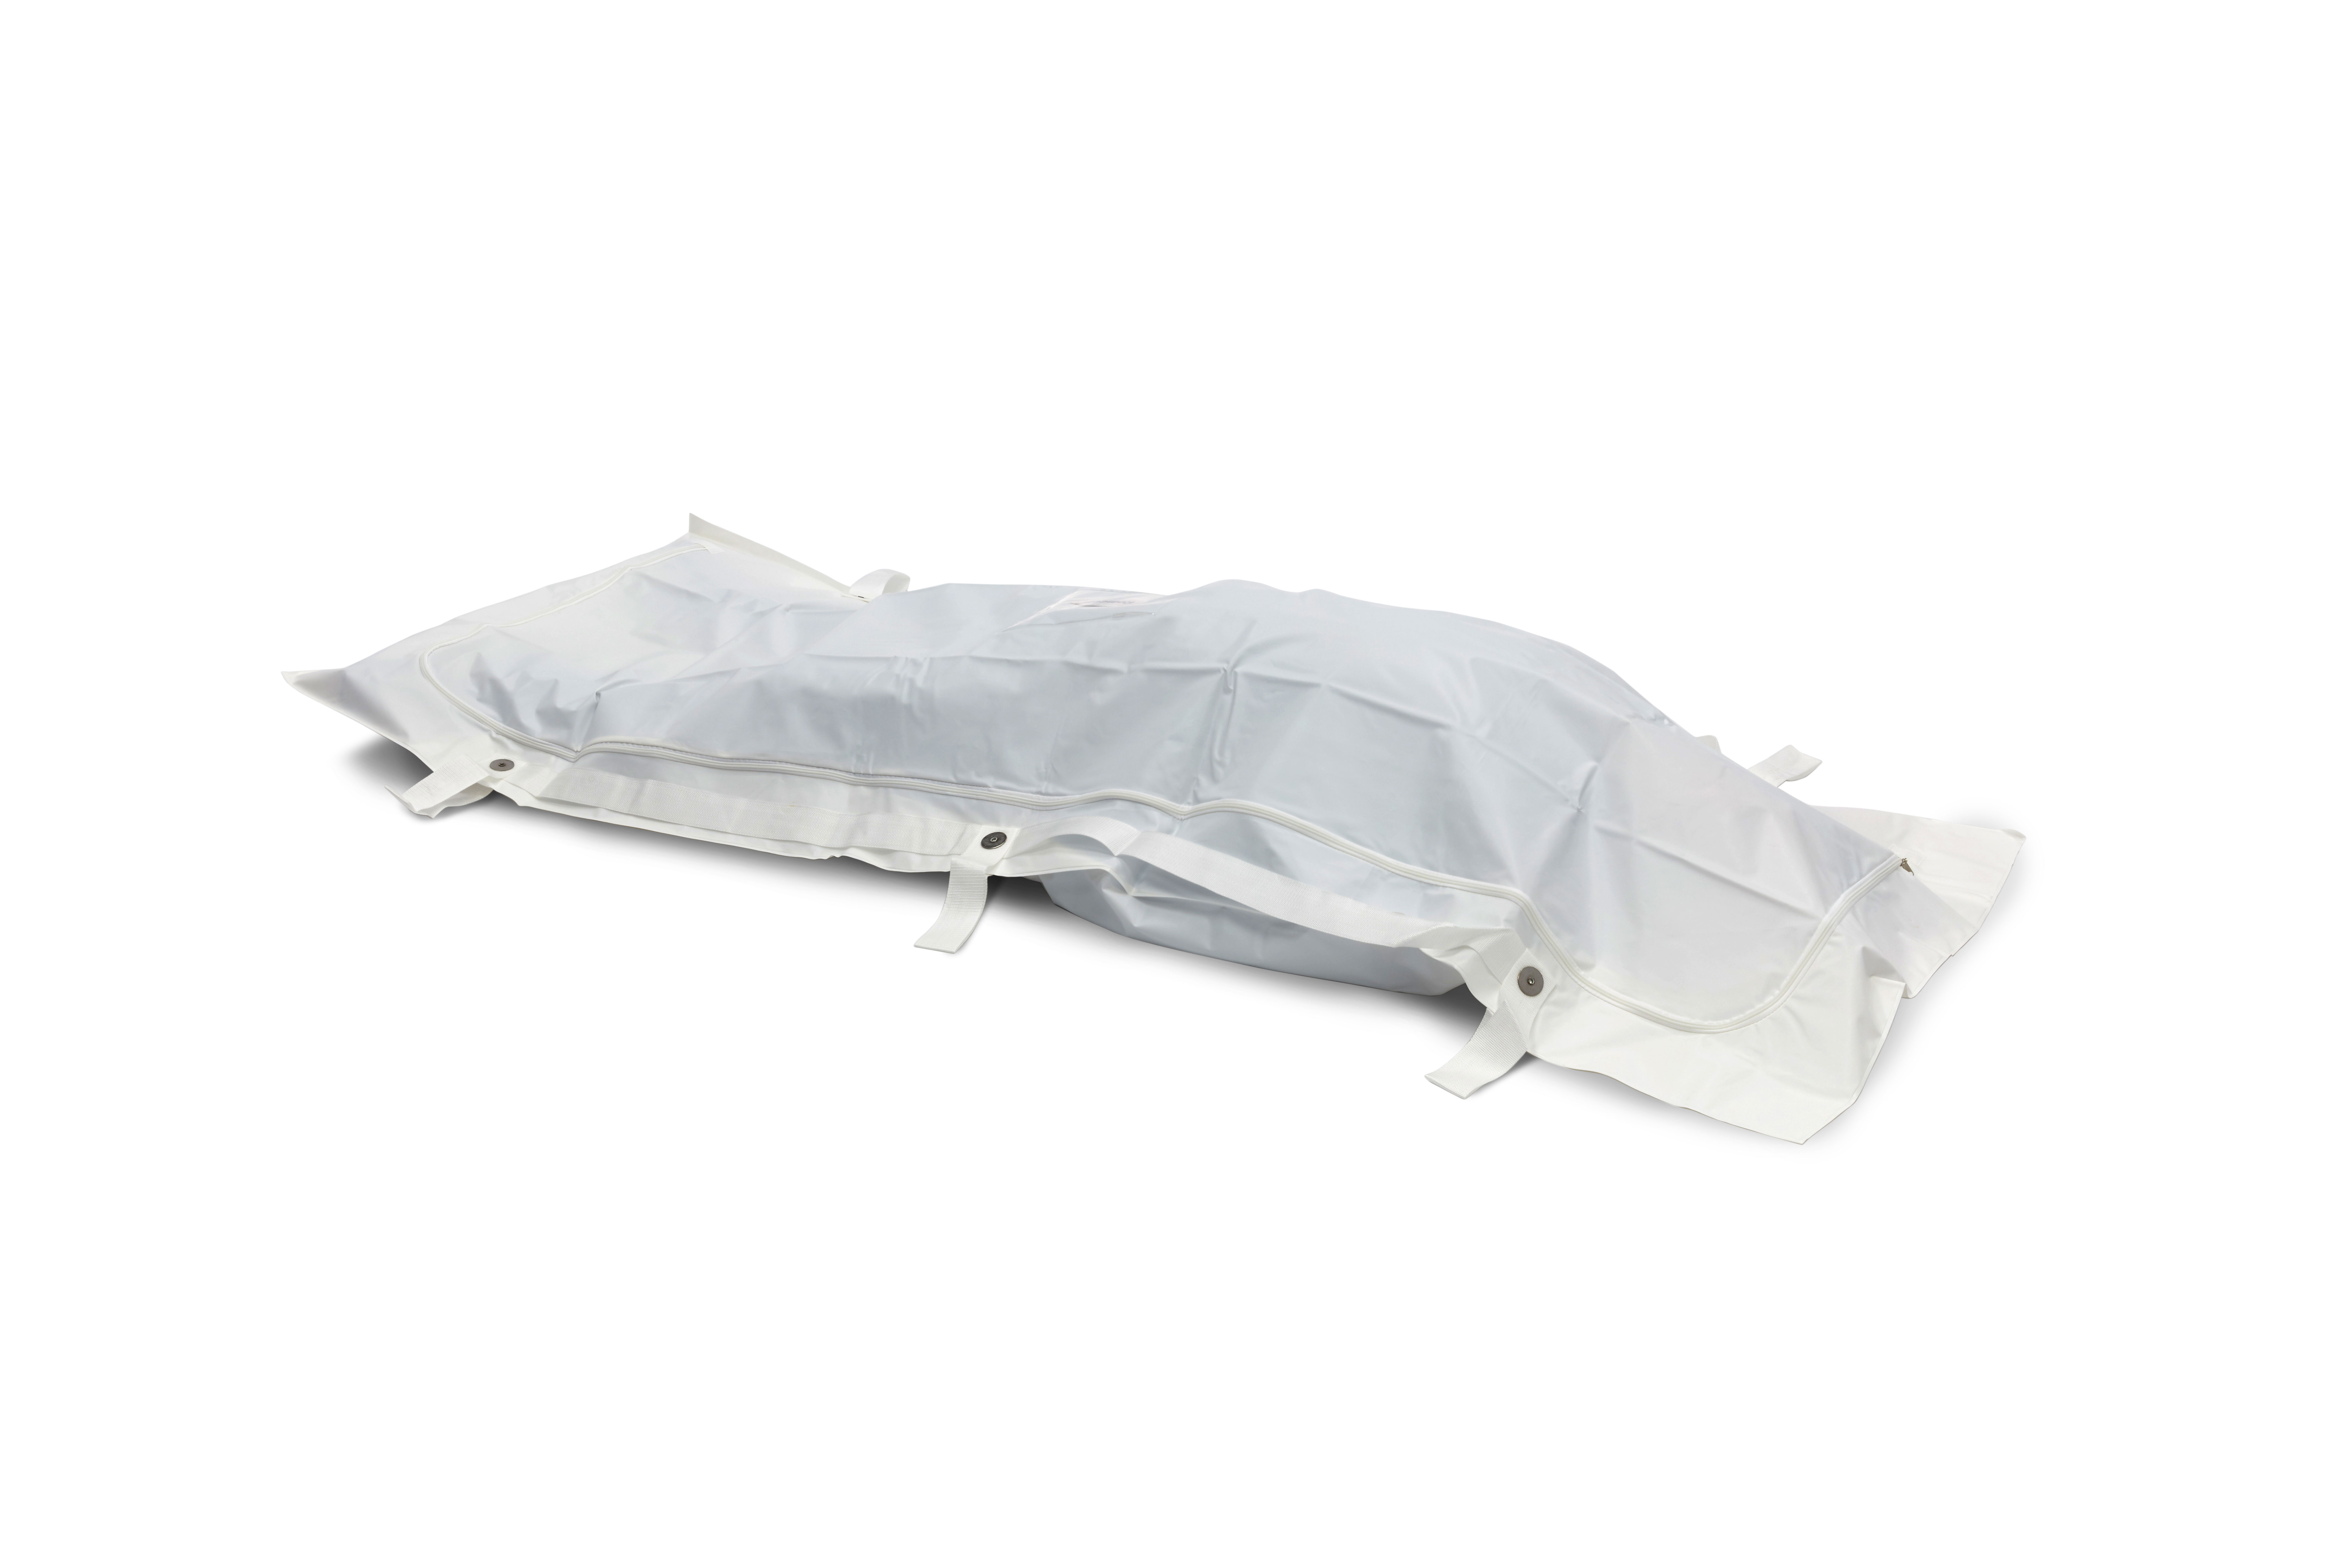 BODYBAGS Romed PEVA body bags/mortuary bags, white, 6 handles, 90x230cm, per piece in a polybag, 20 pcs in a carton.